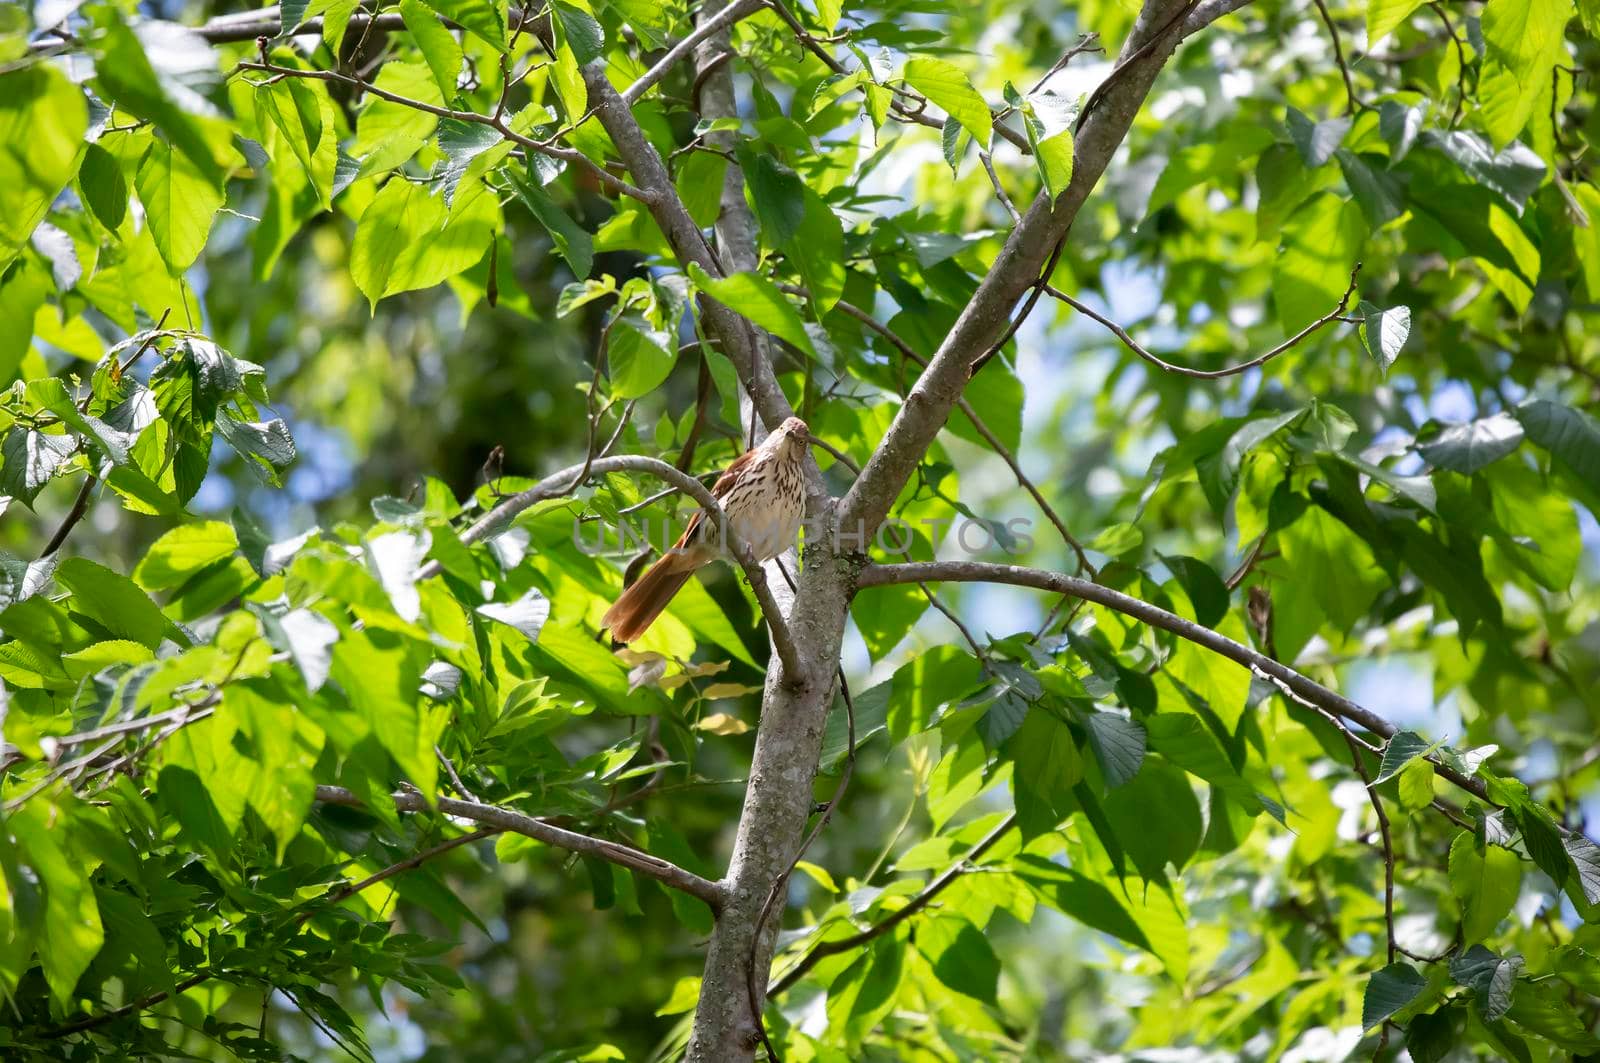 Brown thrasher (Toxostoma rufum) looking out from its perch on a tree branch